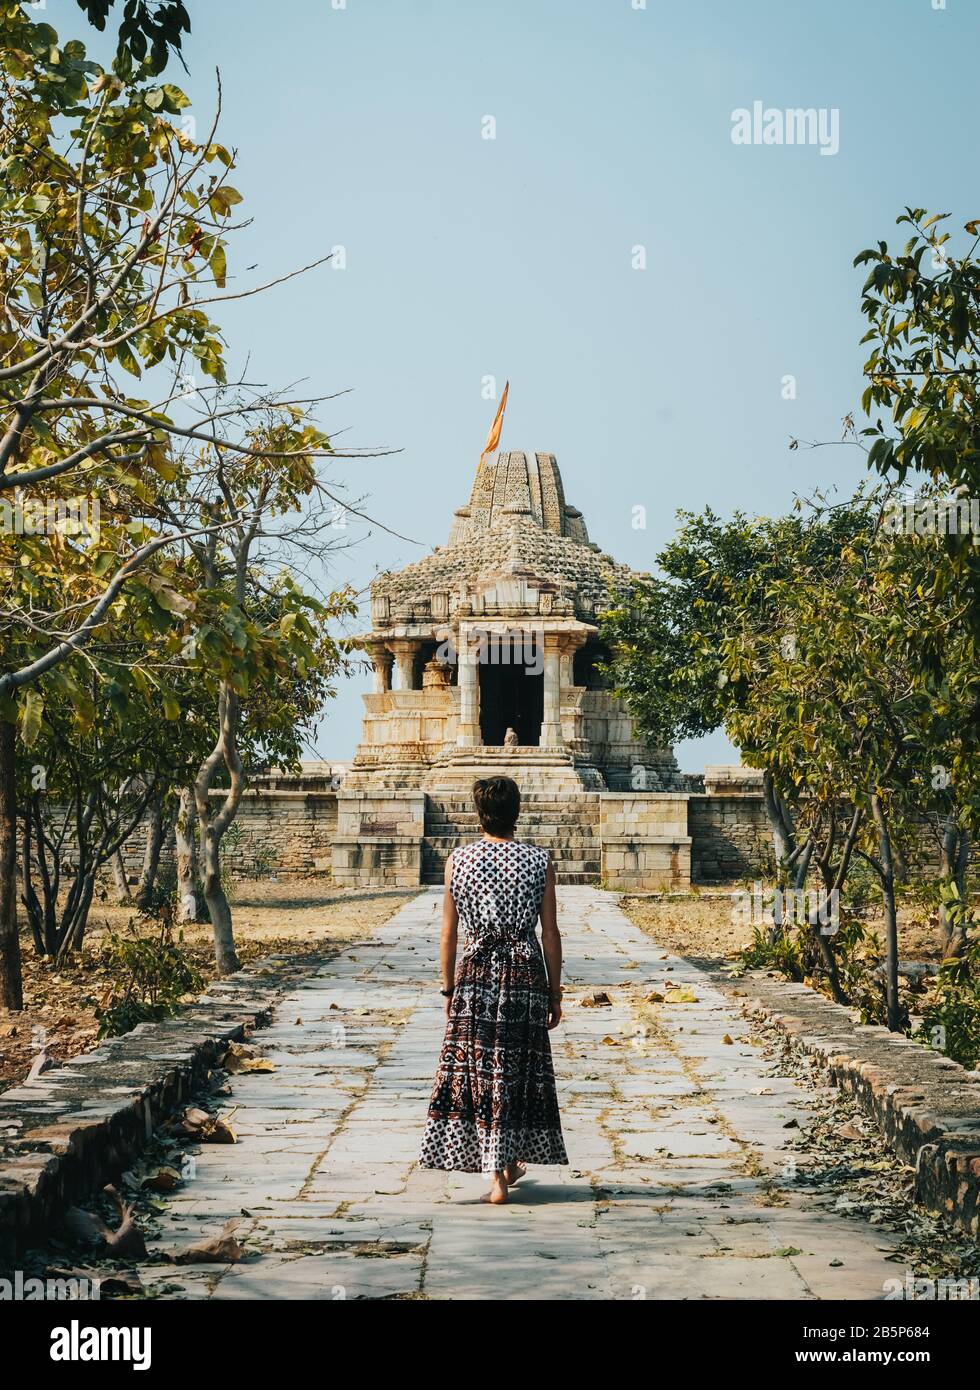 Woman in dress walking shoeless to an ancient Indian temple. Chittorgarh fort, Rajasthan, India. Stock Photo